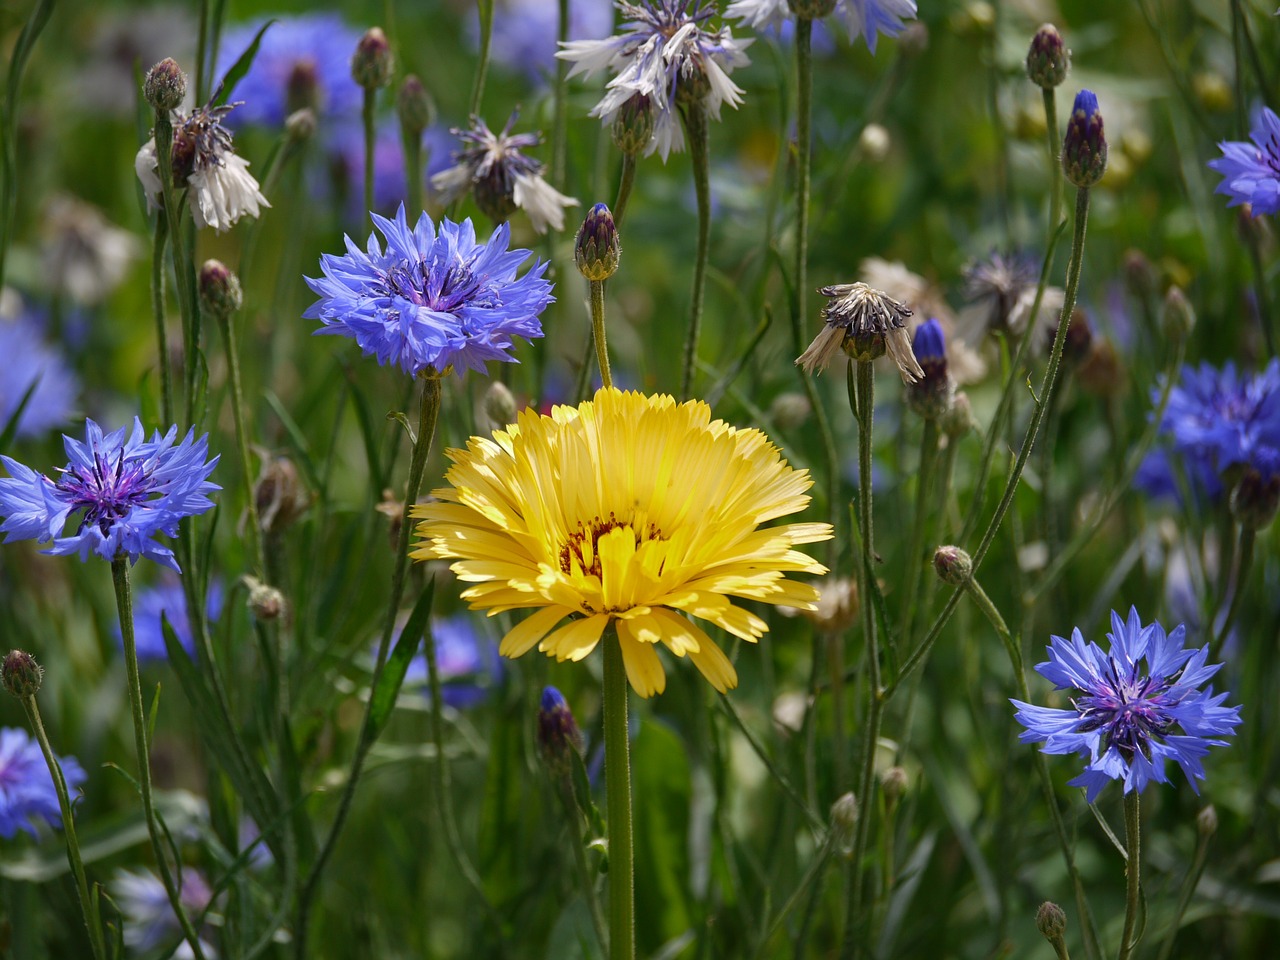 Psychic Abilities, a lone yellow marigold in a filed of purple cornflowers